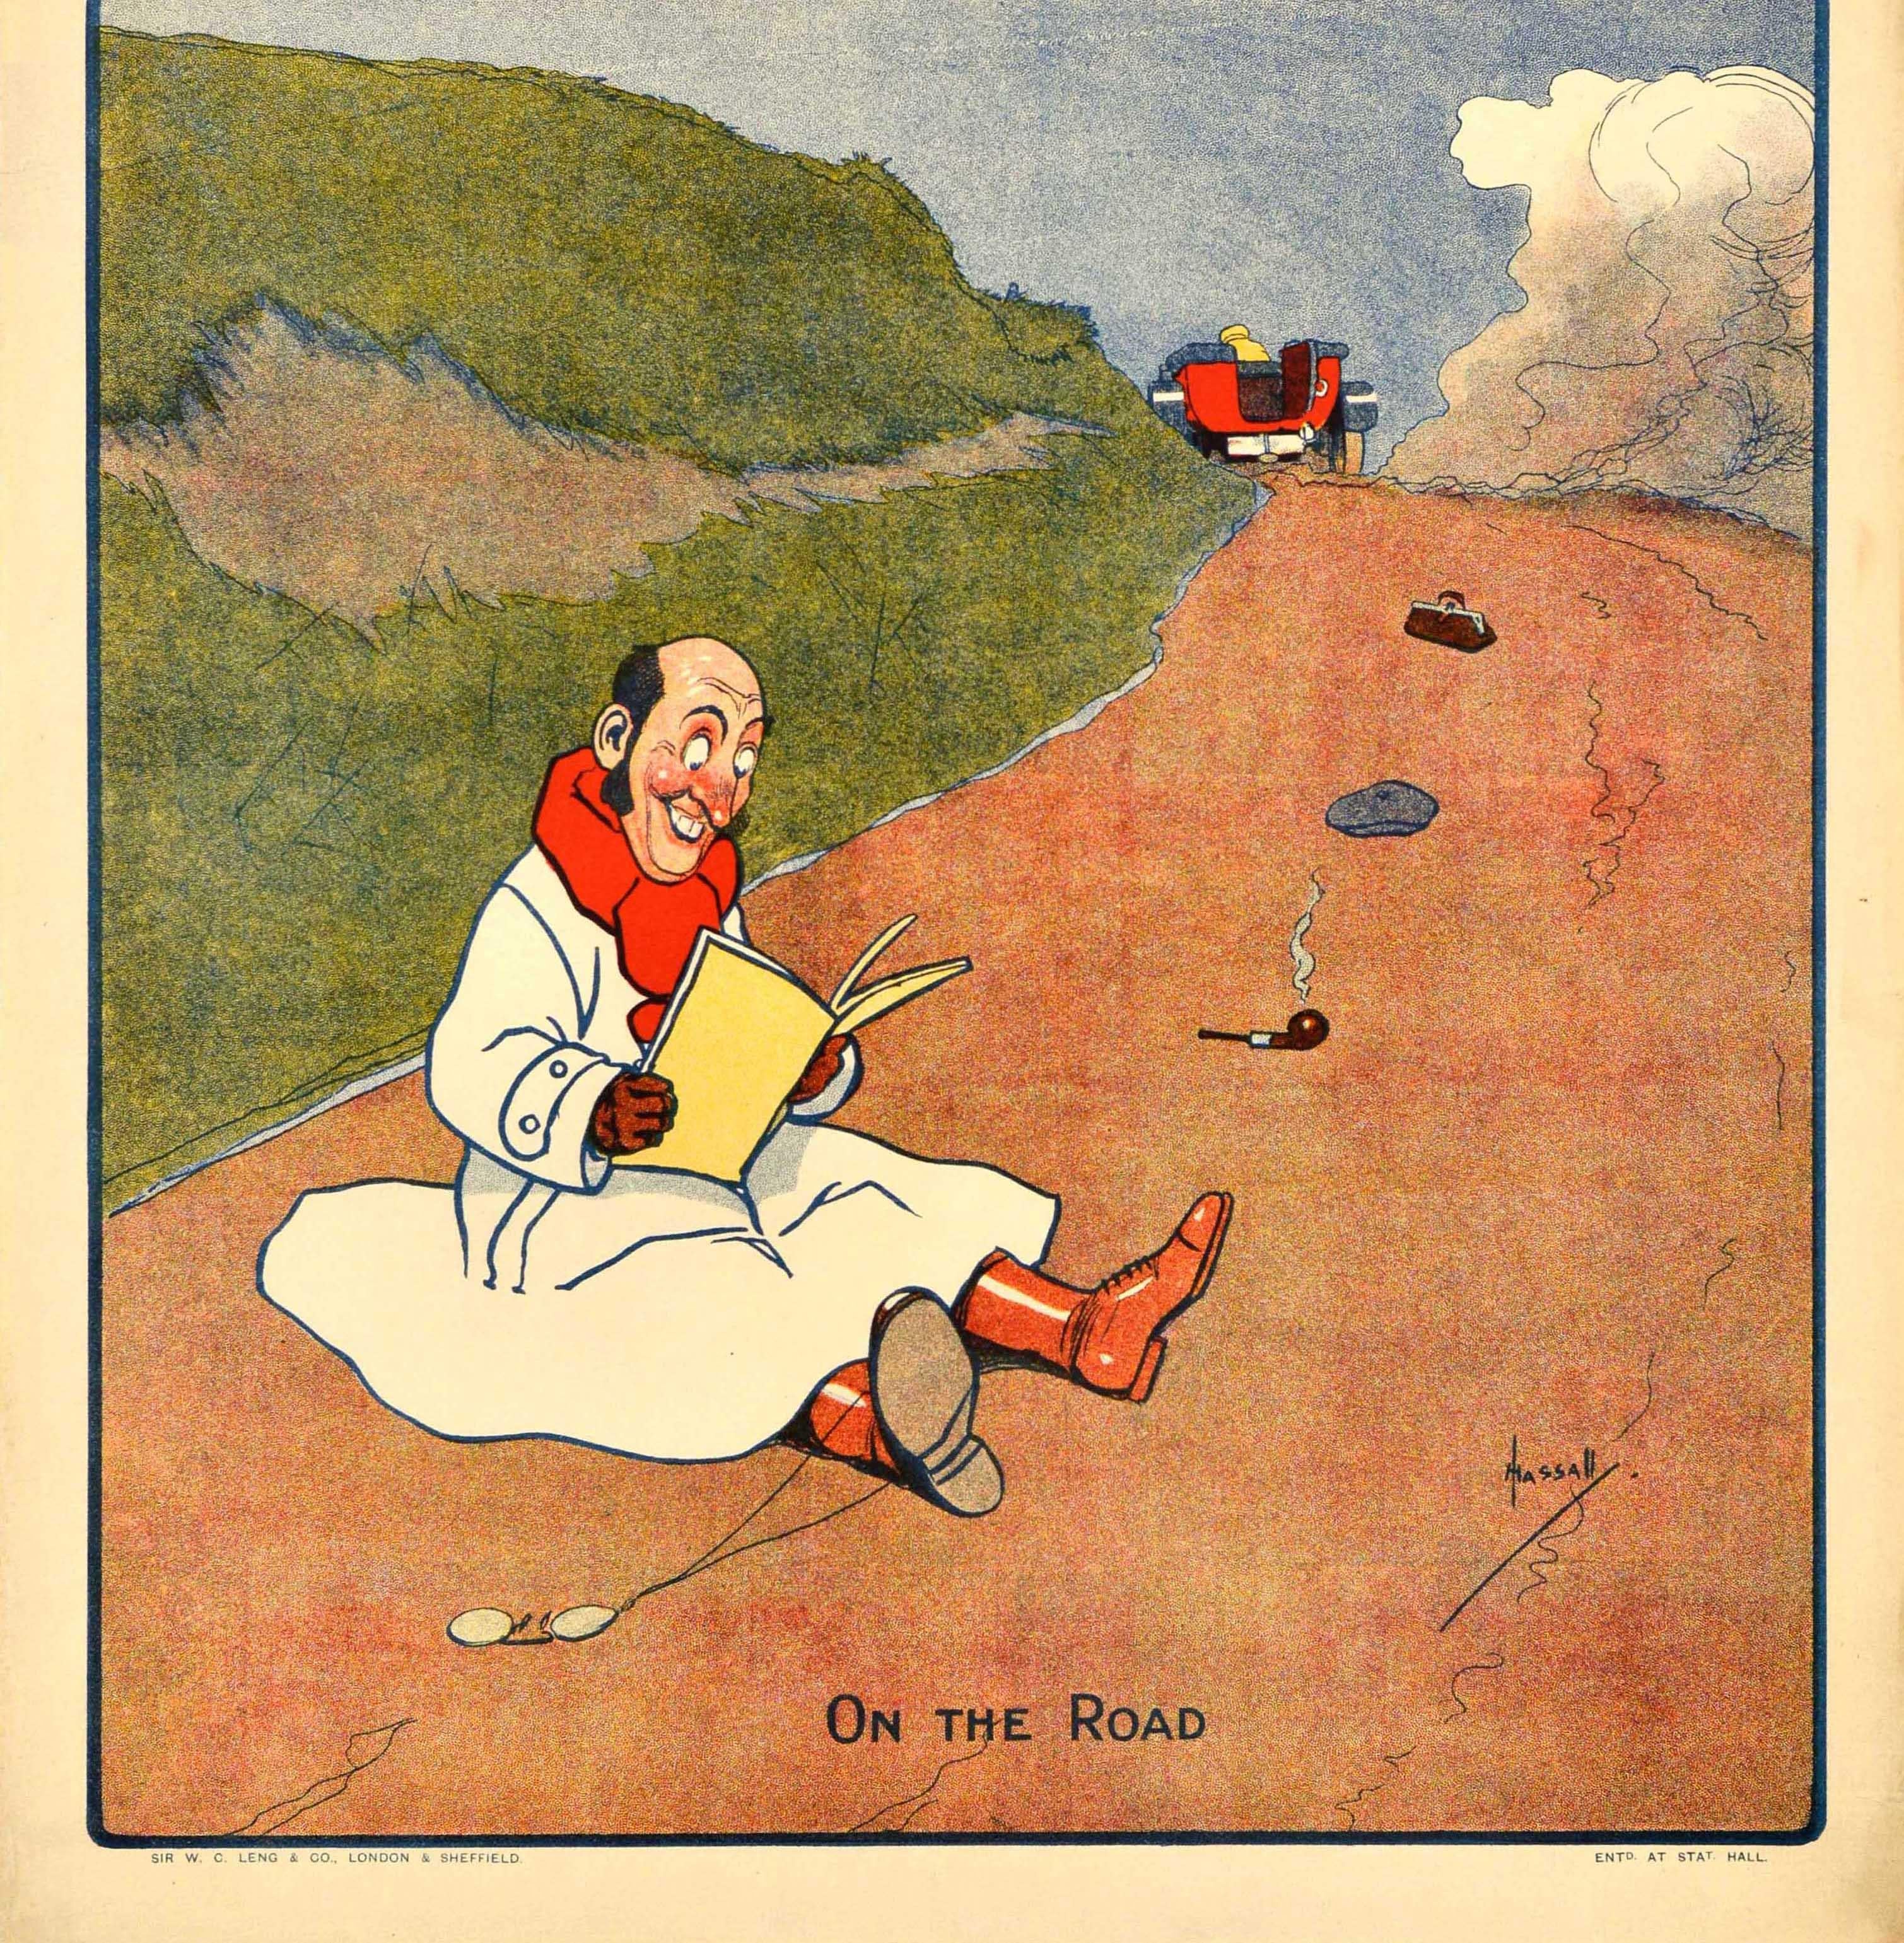 Original antique newspaper advertising poster - The Weekly Telegraph On The Road - featuring an illustration of a smiling man in a long white coat, red scarf and boots sitting on a road reading the Weekly Telegraph paper with his glasses around one